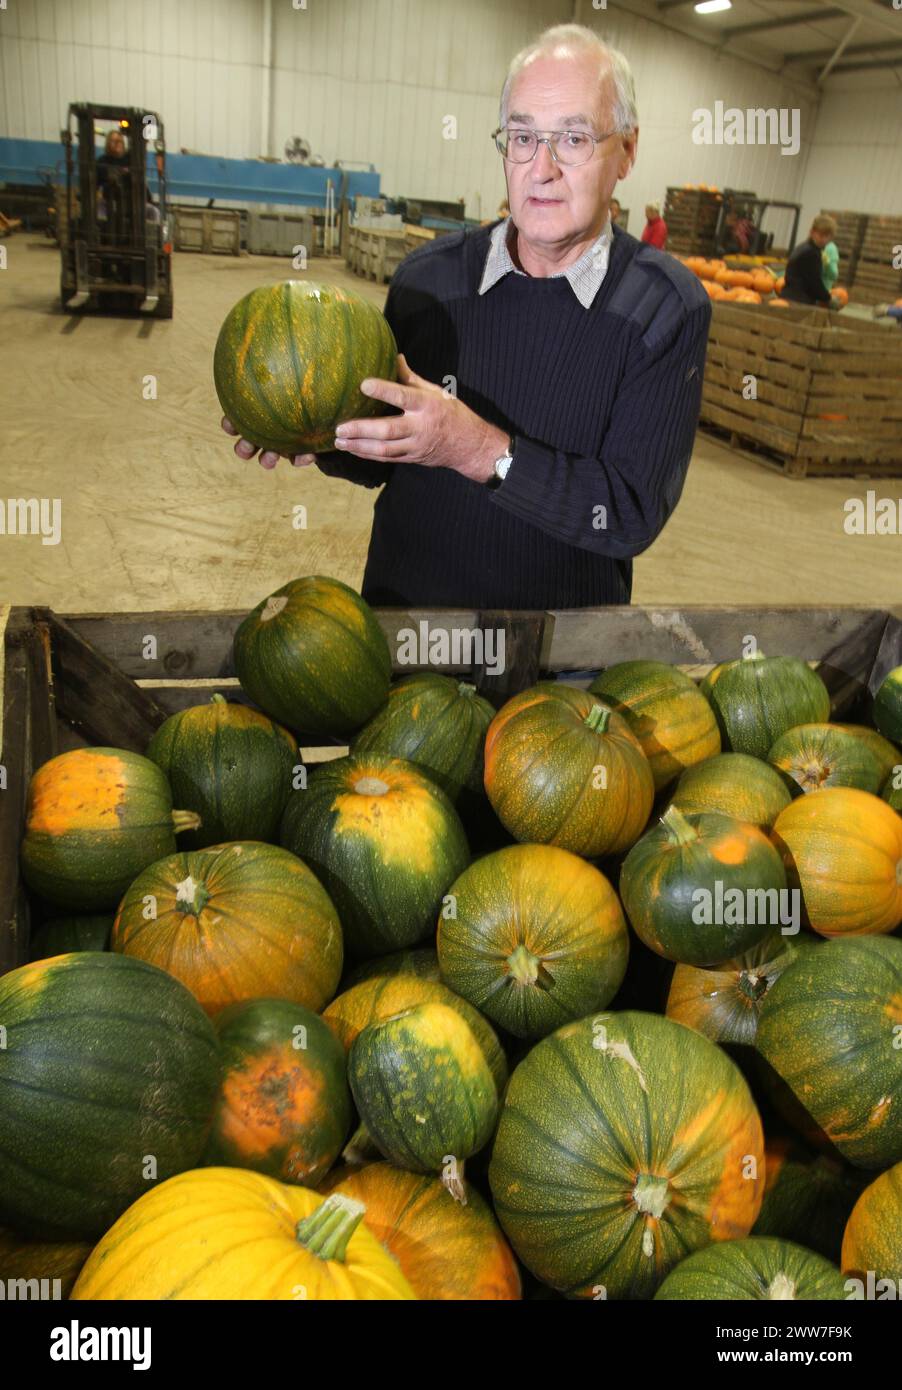 21/09/11. Today Photo...David Bowman, 63, inspects a crate of green pumpkins in his warehouse this morning...Europe's largest pumpkin farmer is worrie Stock Photo